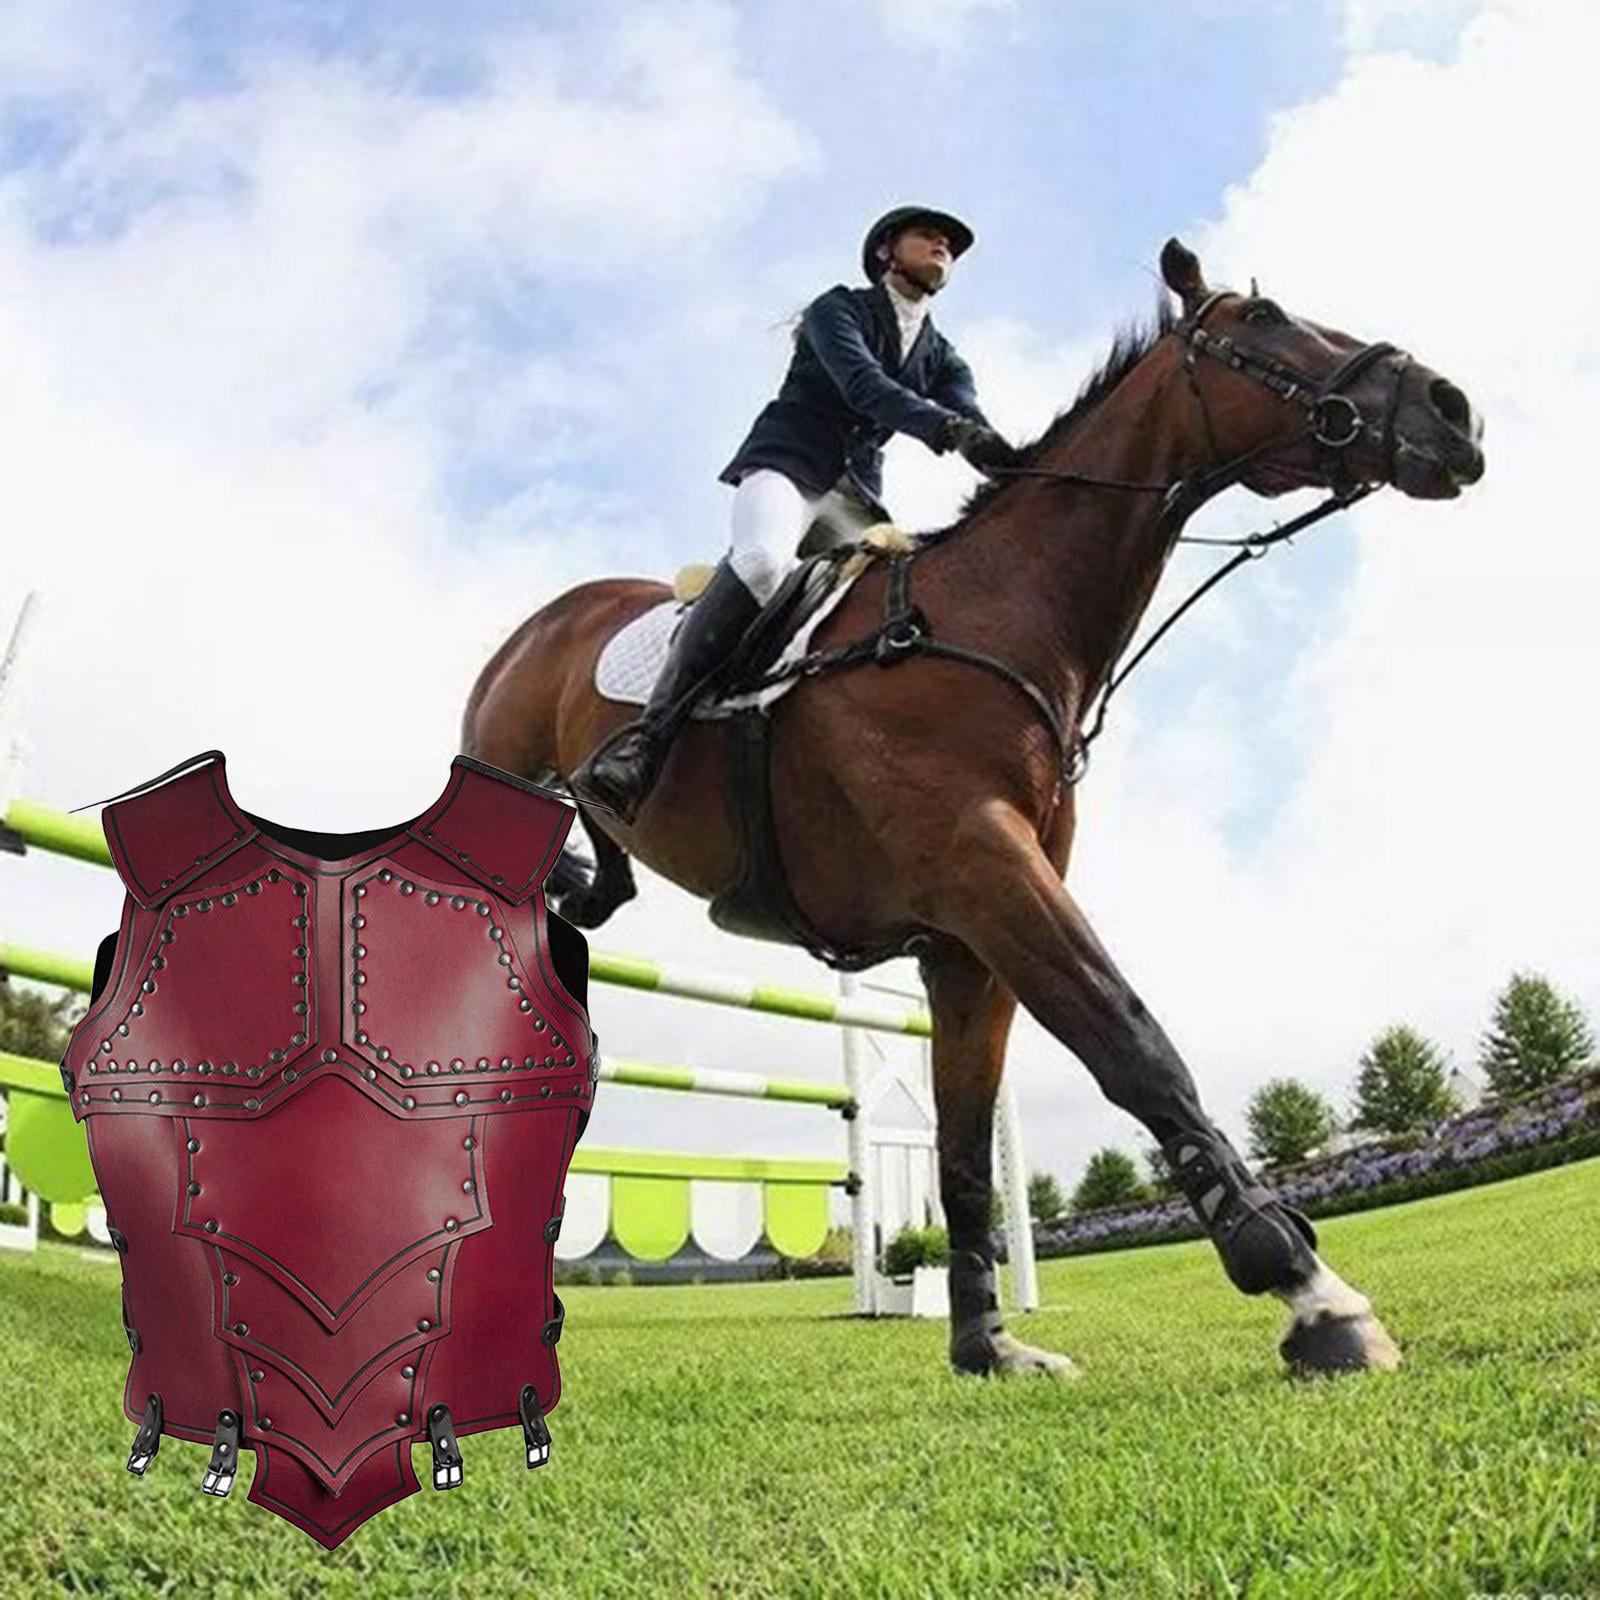 Adult's Equestrian Horse Riding Vest Protective Eventing Body Protector Gear 